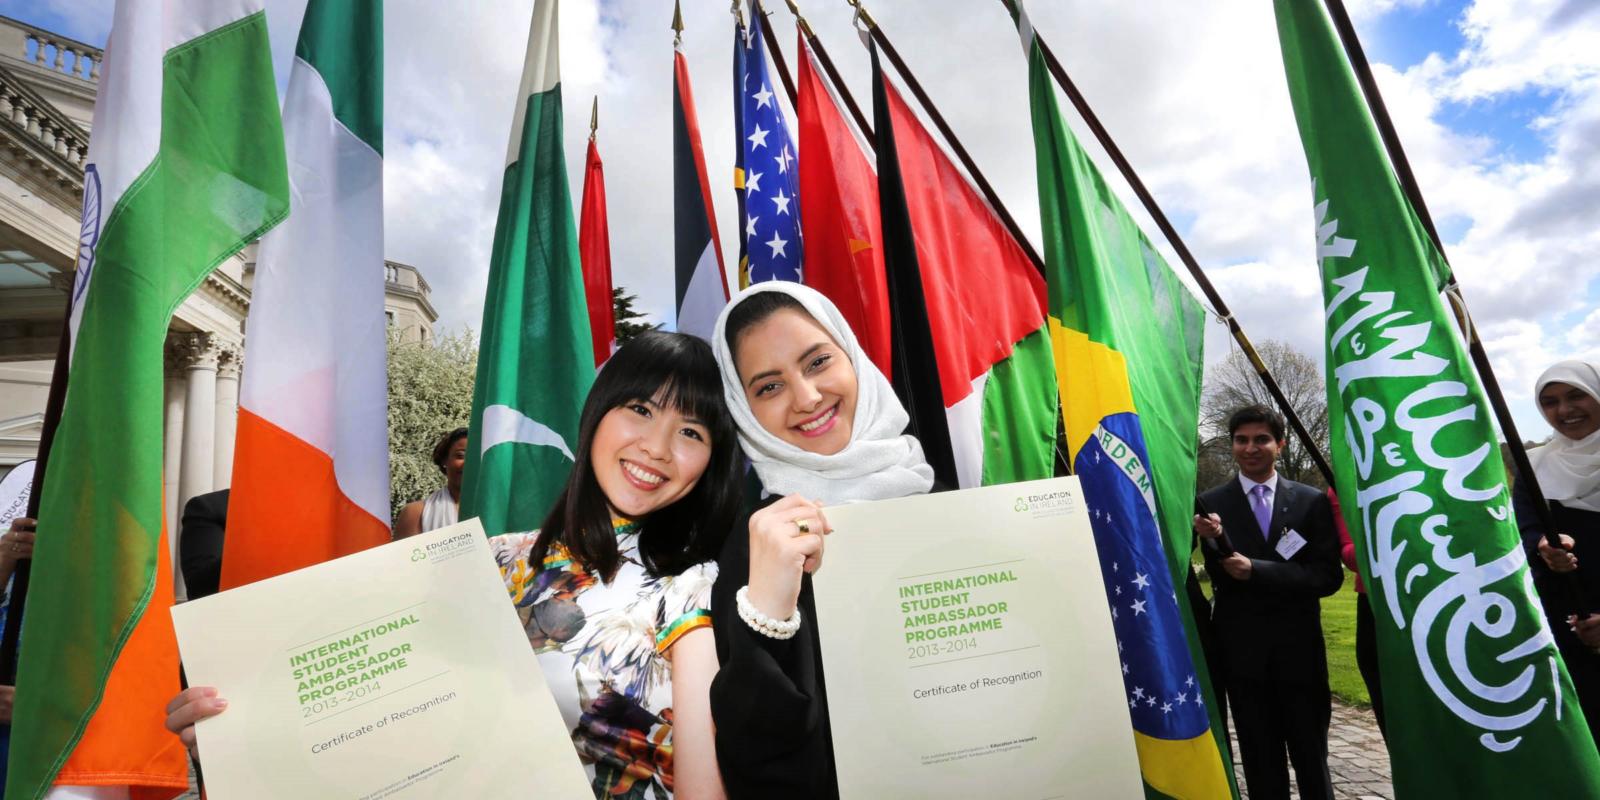 Government of Ireland International Education Scholarships Programme 2020 (Up to 60 scholarships for Bachelor, Master or PhD Study)